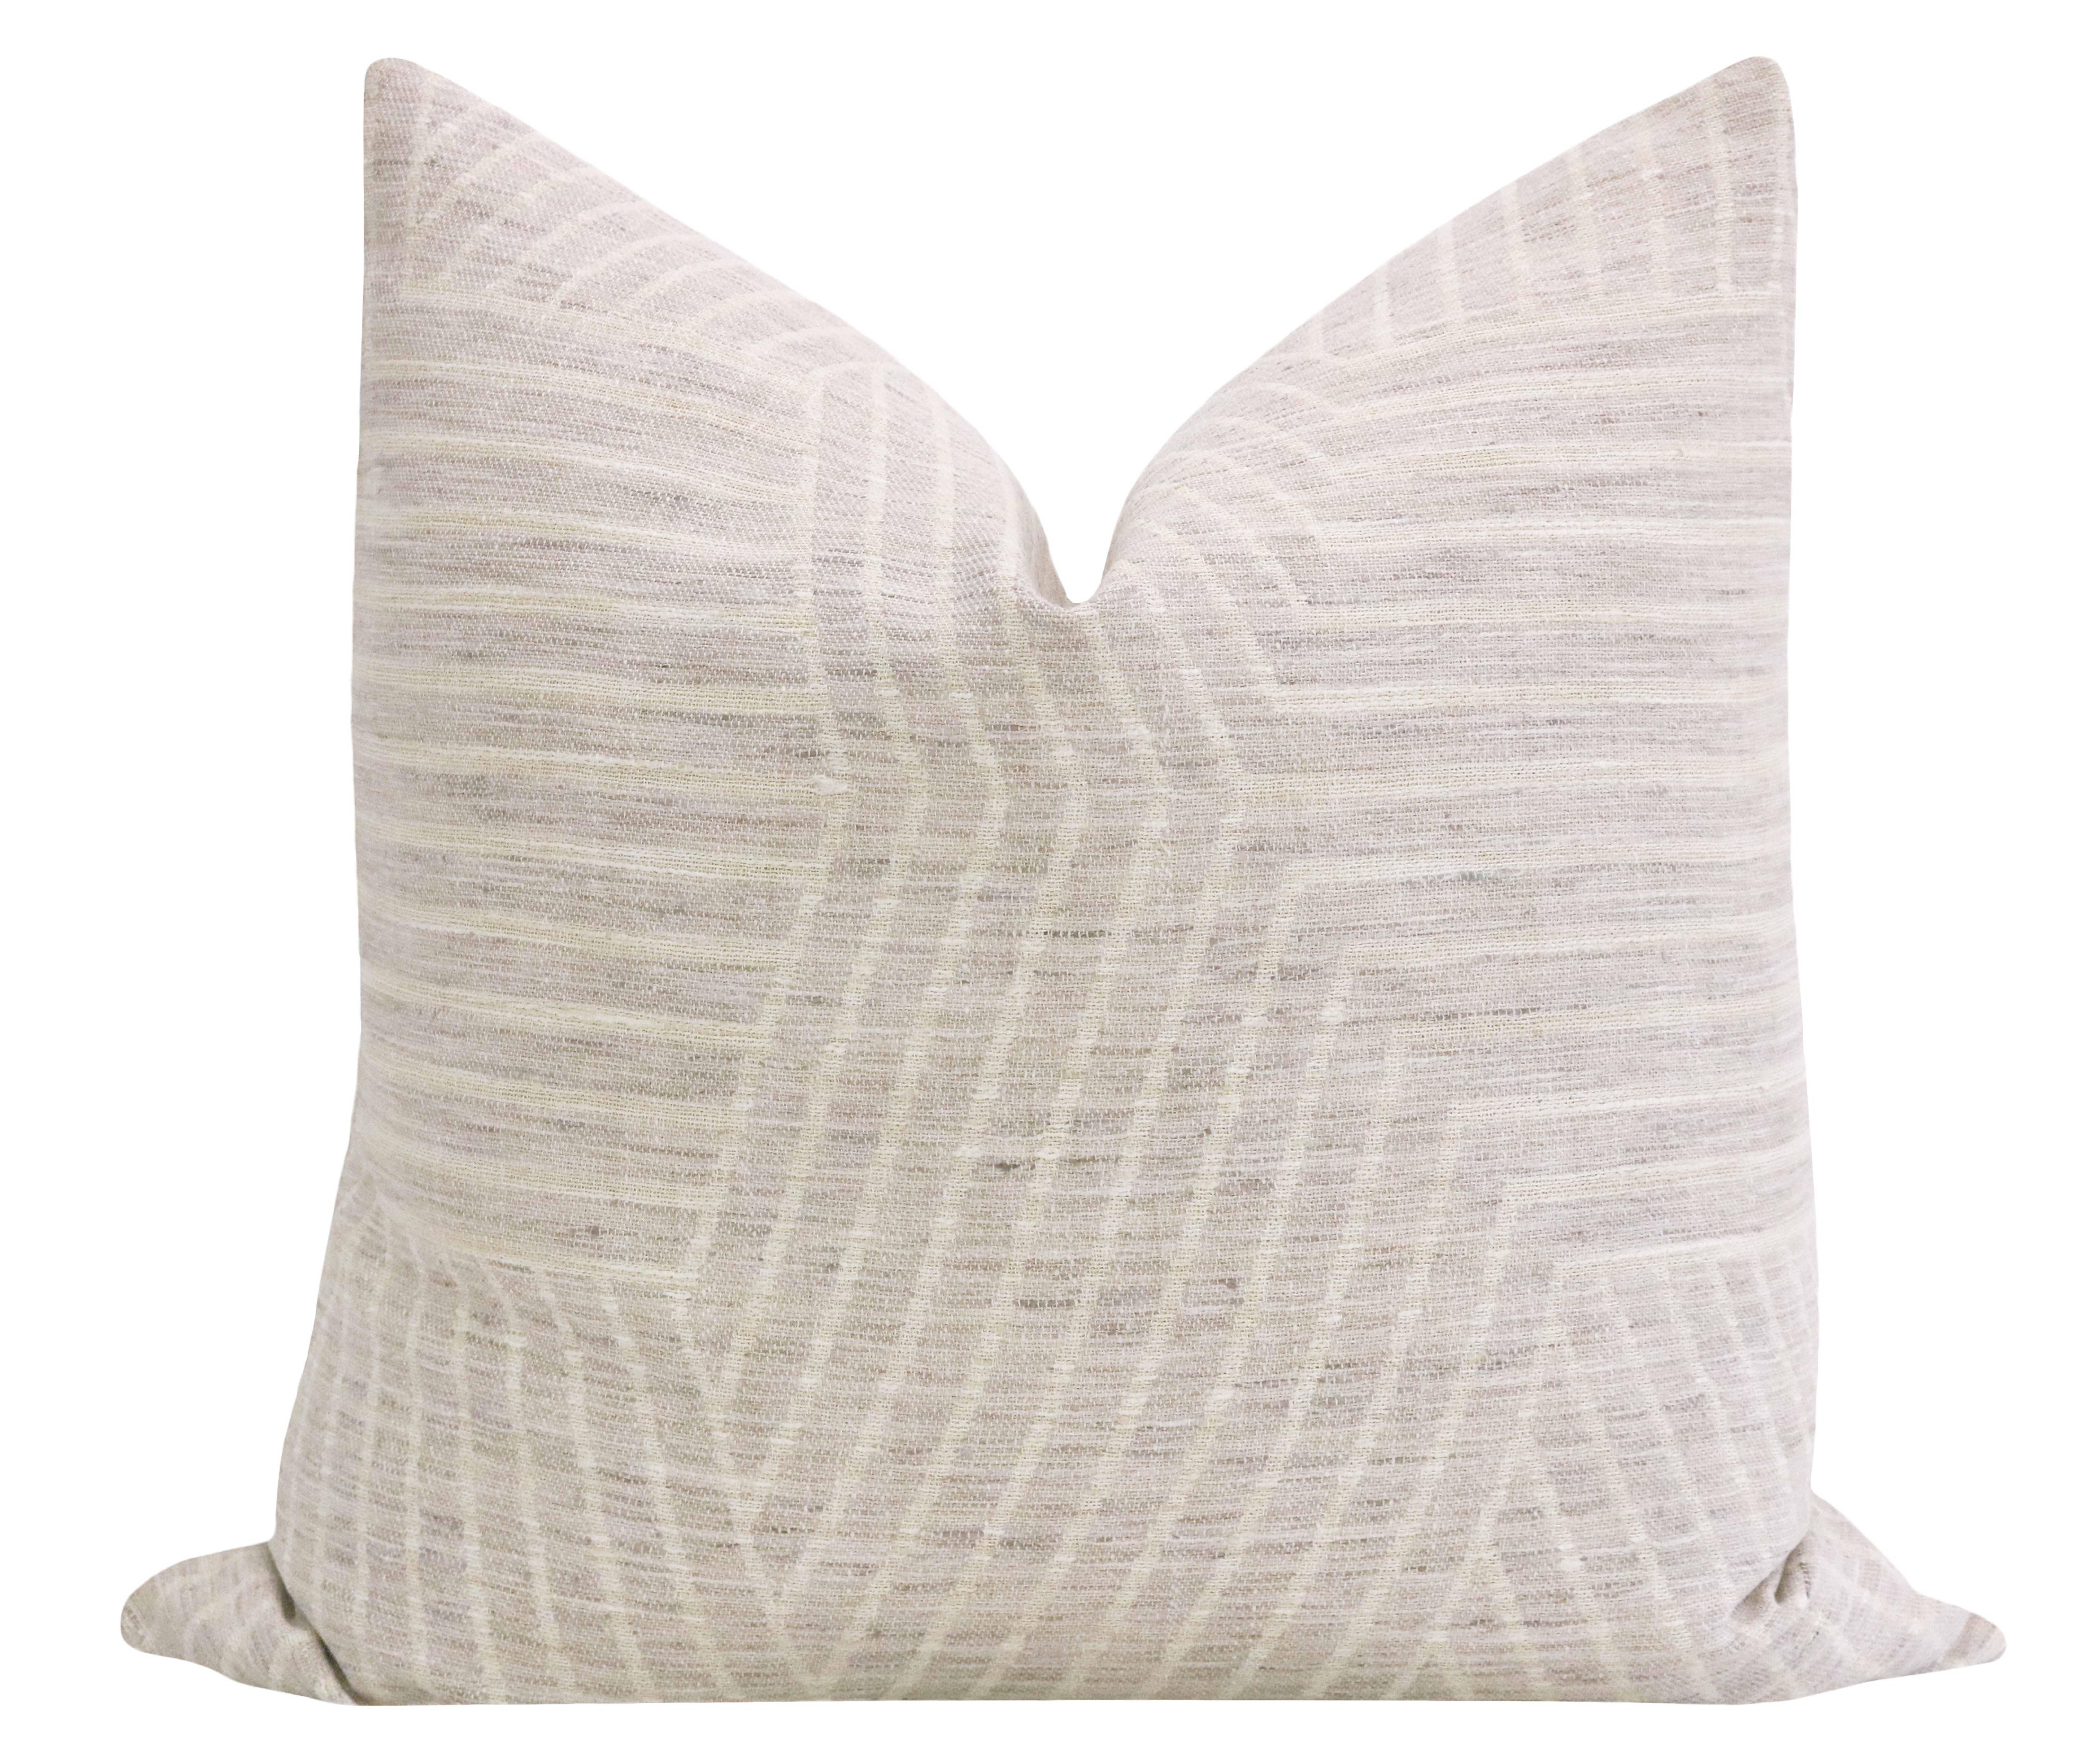 Labyrinth Linen Pillow Cover, Oyster, 18" x 18" - Little Design Company